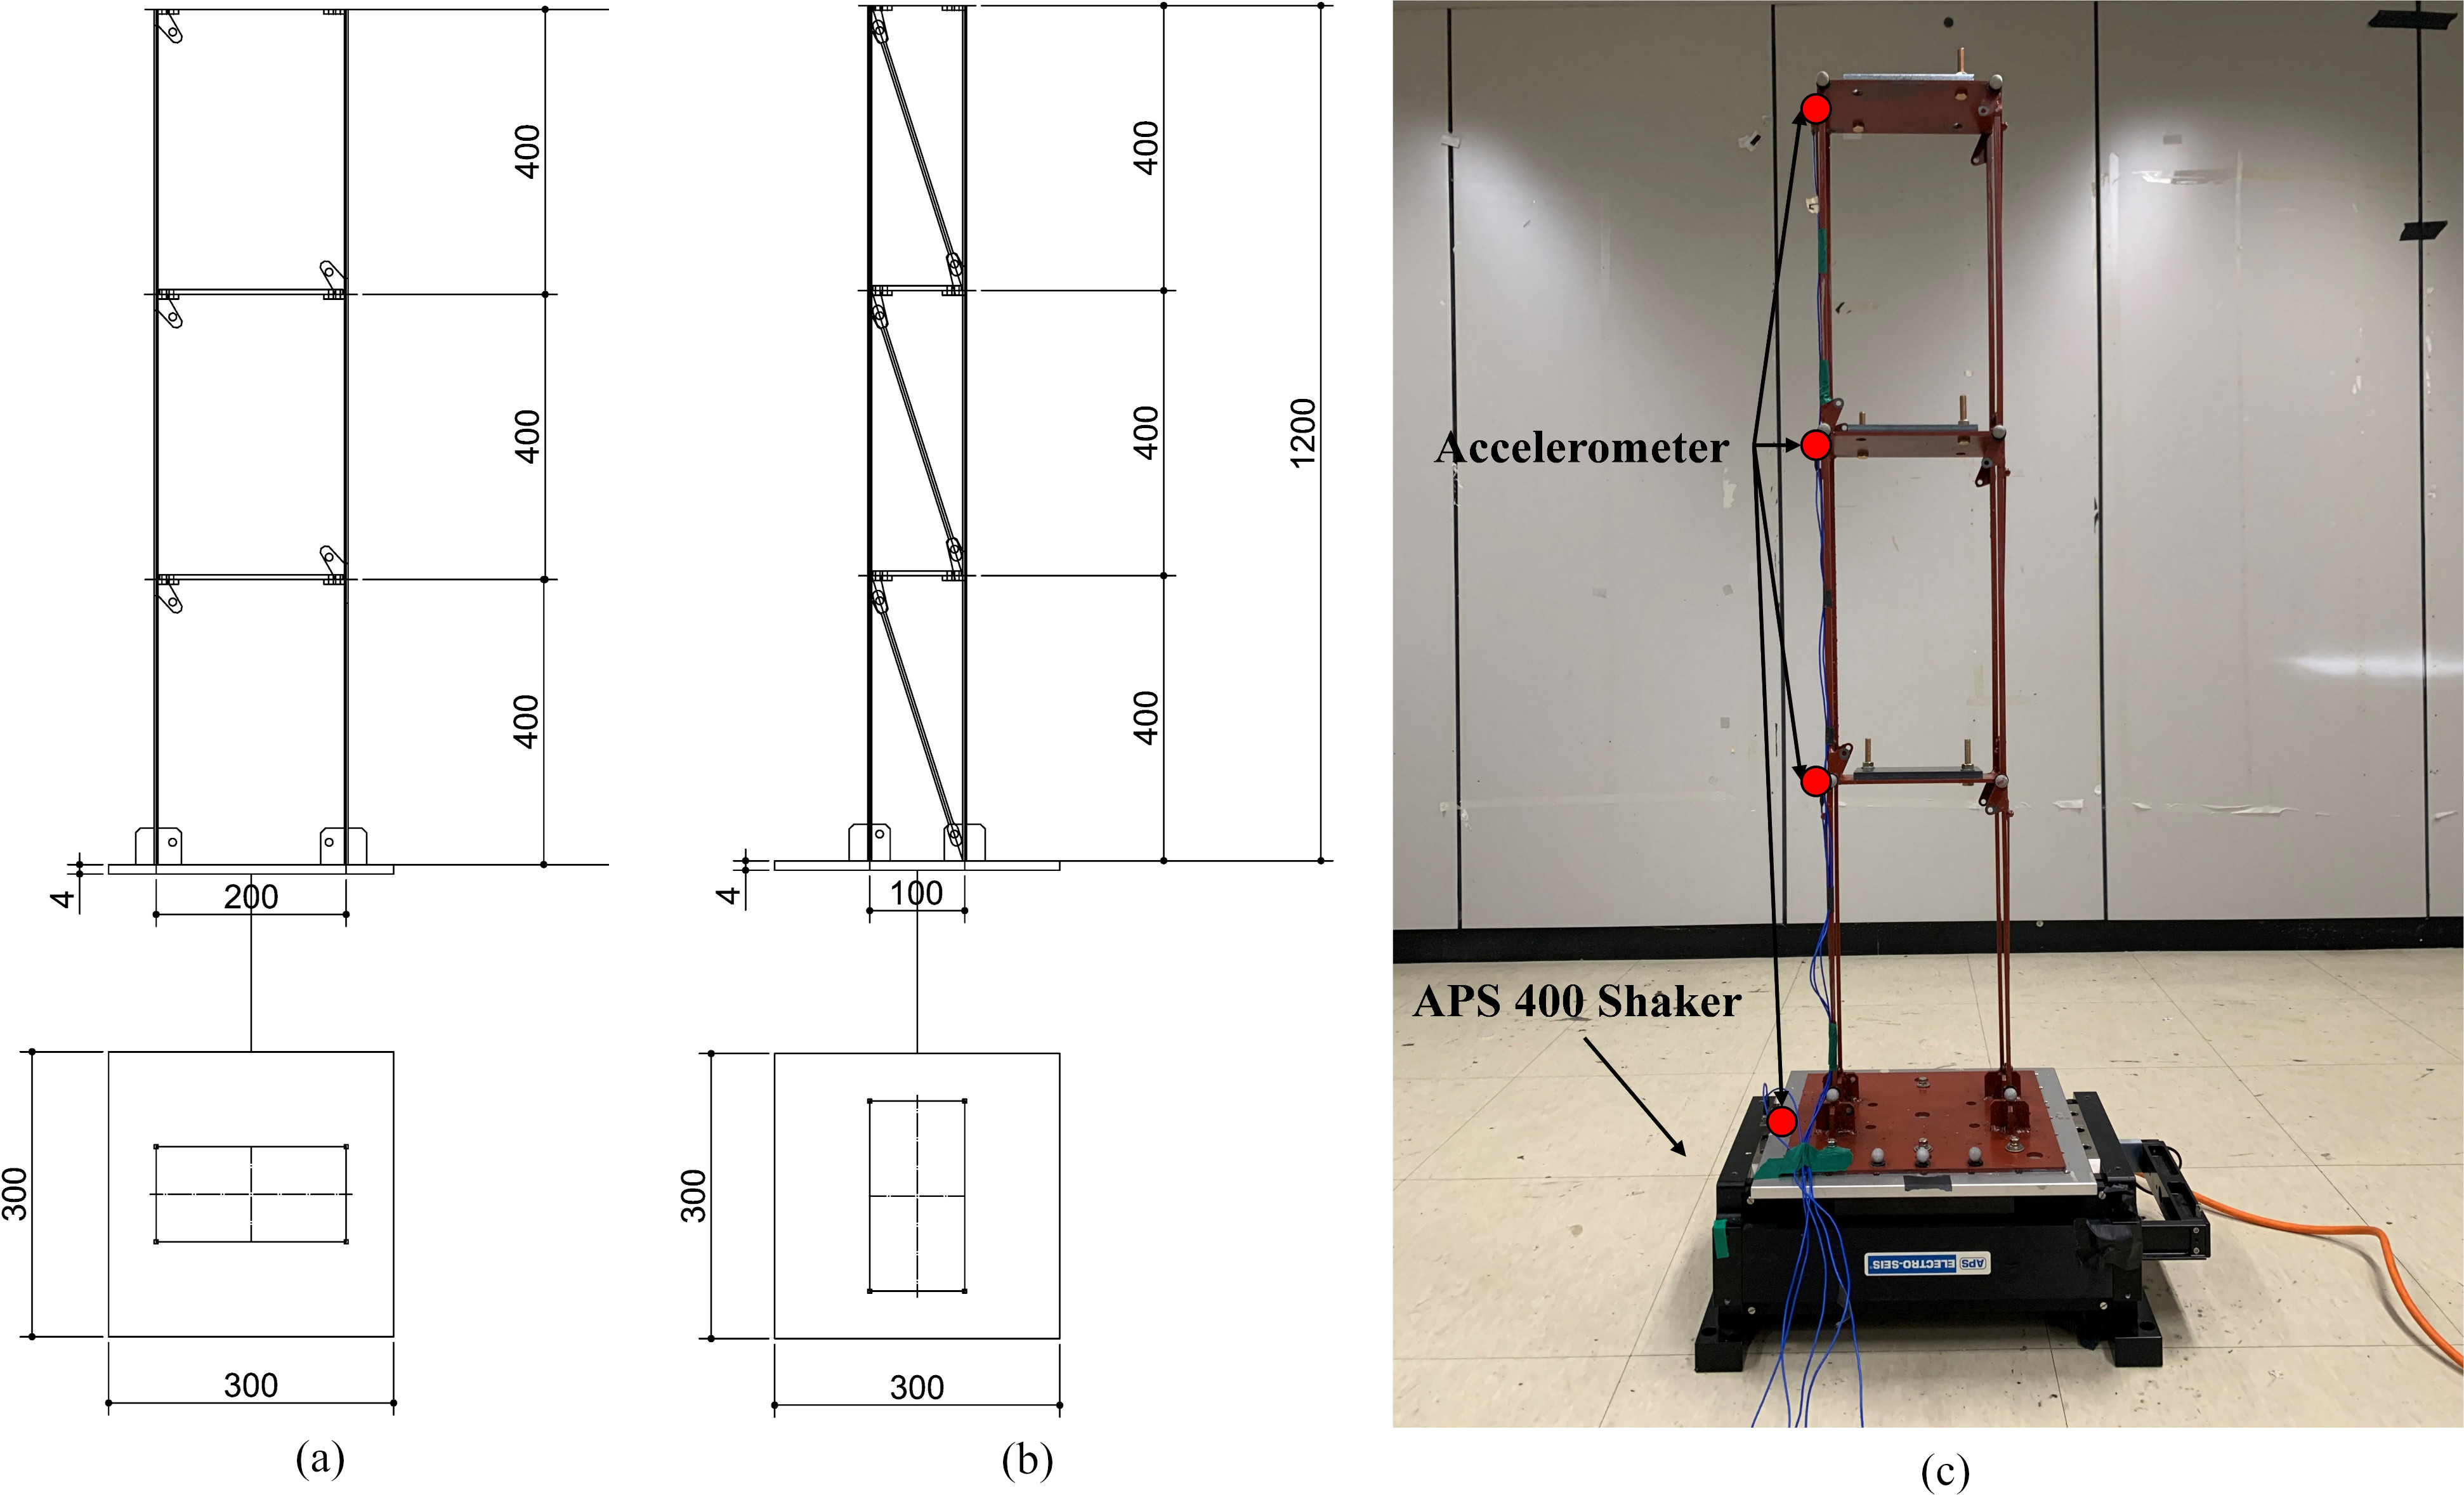 Steel-frame structure model design: (a) Front view, (b) Side view, (c) Experiment model.